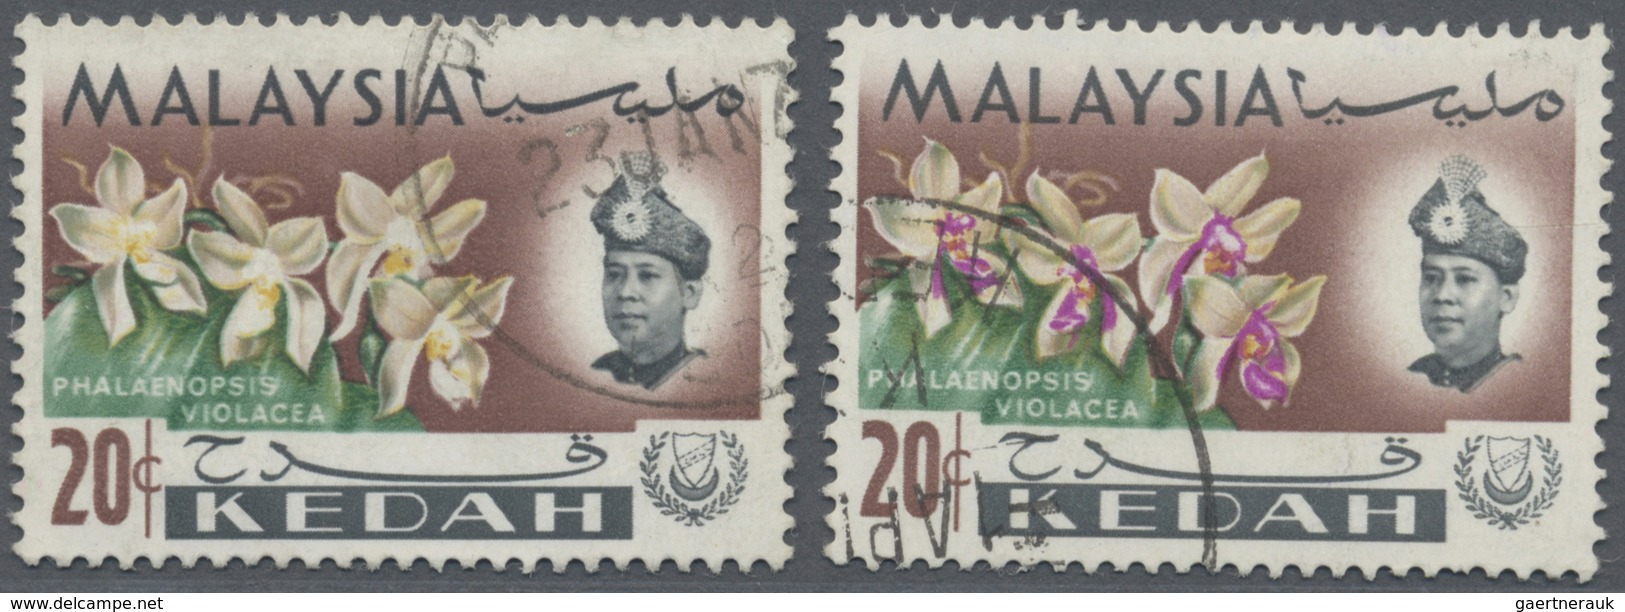 O Malaiische Staaten - Kedah: 1965, Orchids 20c. 'Phalaenopsis Violacea' With BRIGHT PURPLE OMITTED (b - Kedah